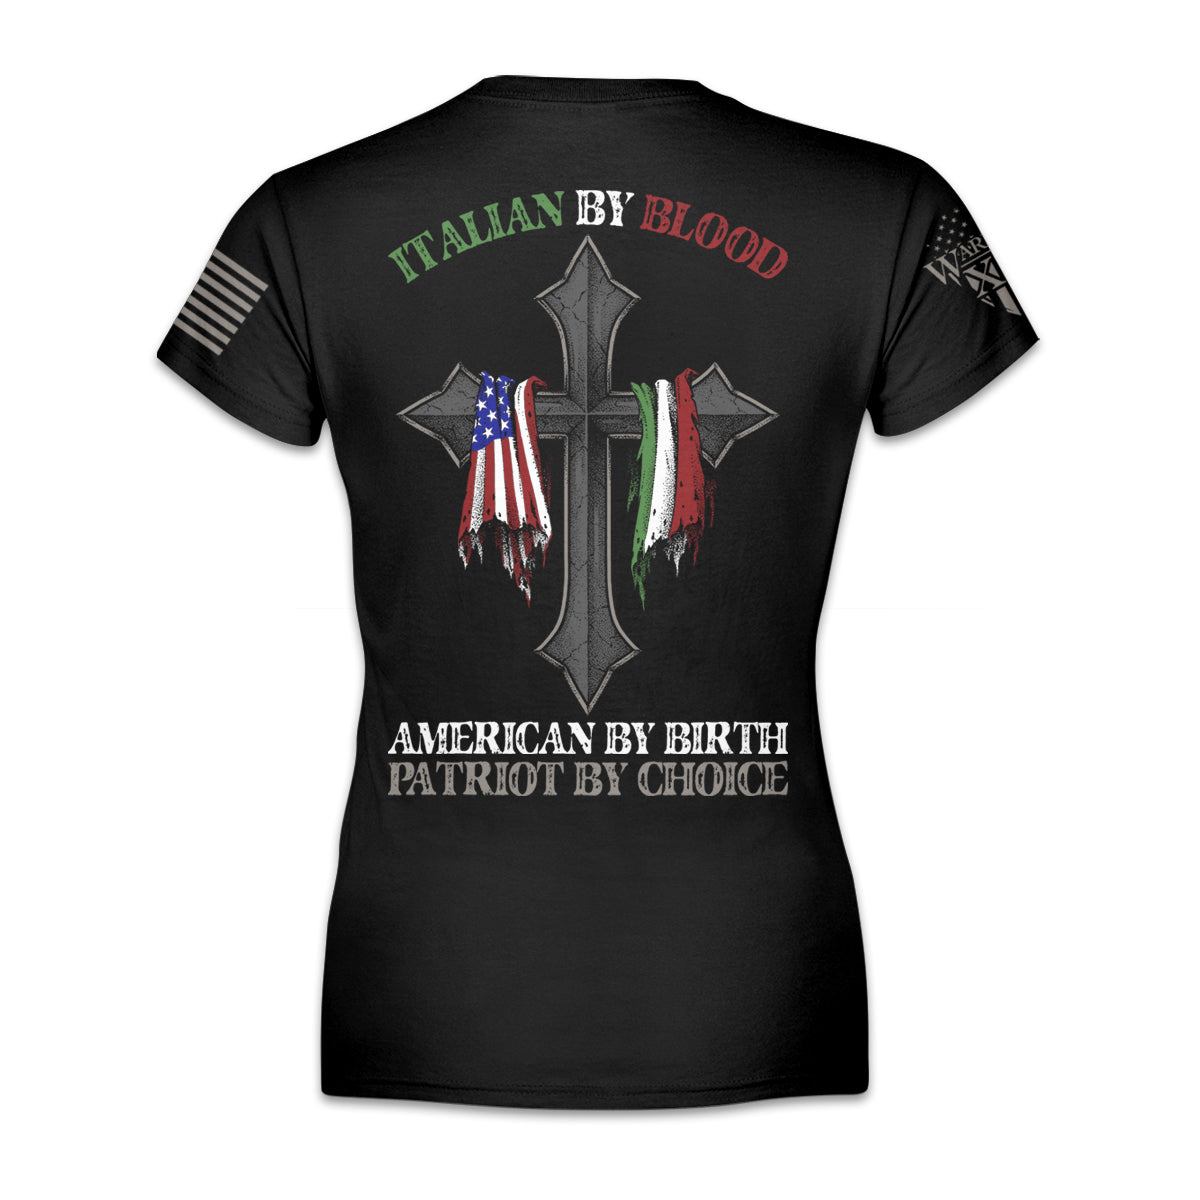 A black women's relaxed fit shirt with the words "Italian by blood, American by birth, patriot by choice" with a cross holding the American and Italian flag printed on the back of the shirt.